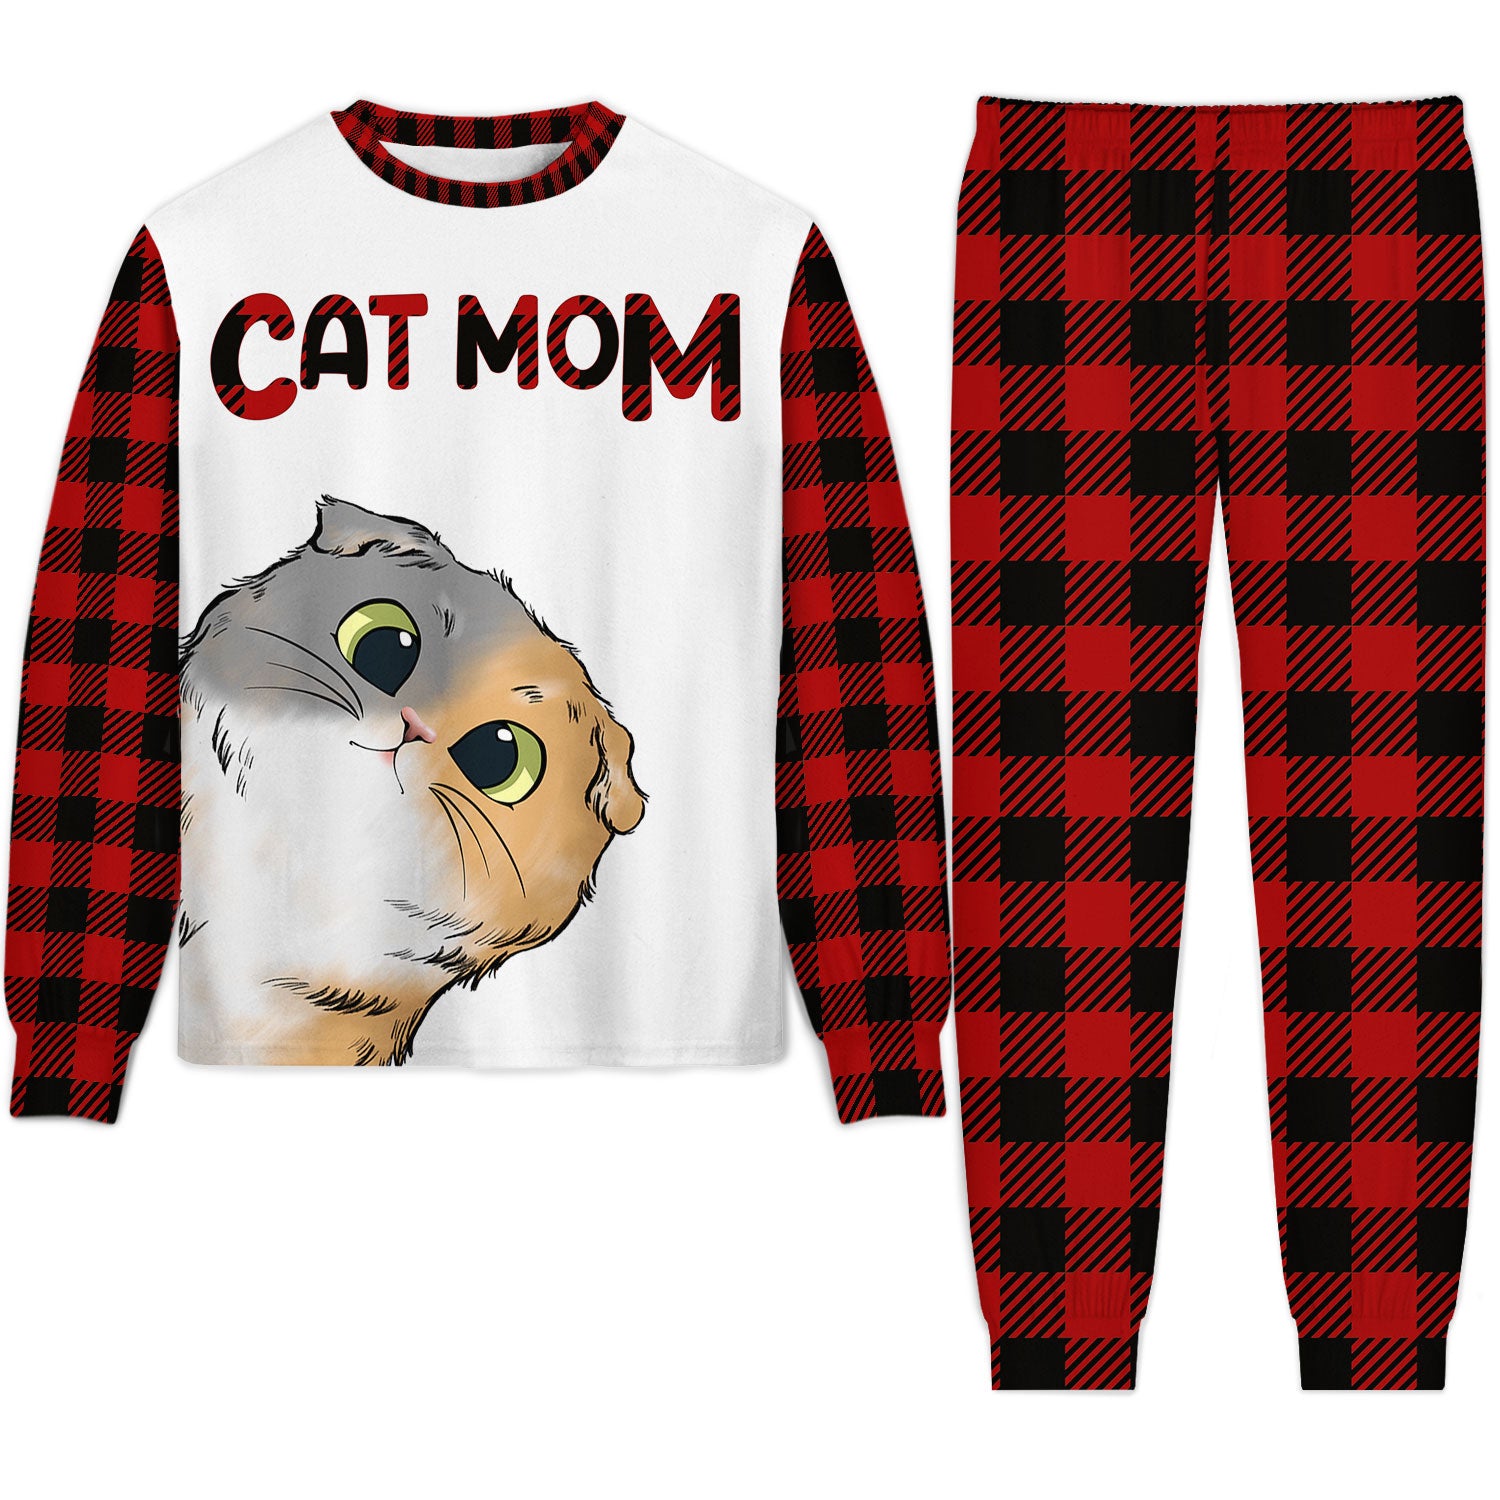 Cat Mom Cat Dad Cartoon Style - Gift For Cat Lovers - Personalized Unisex Pajamas Set